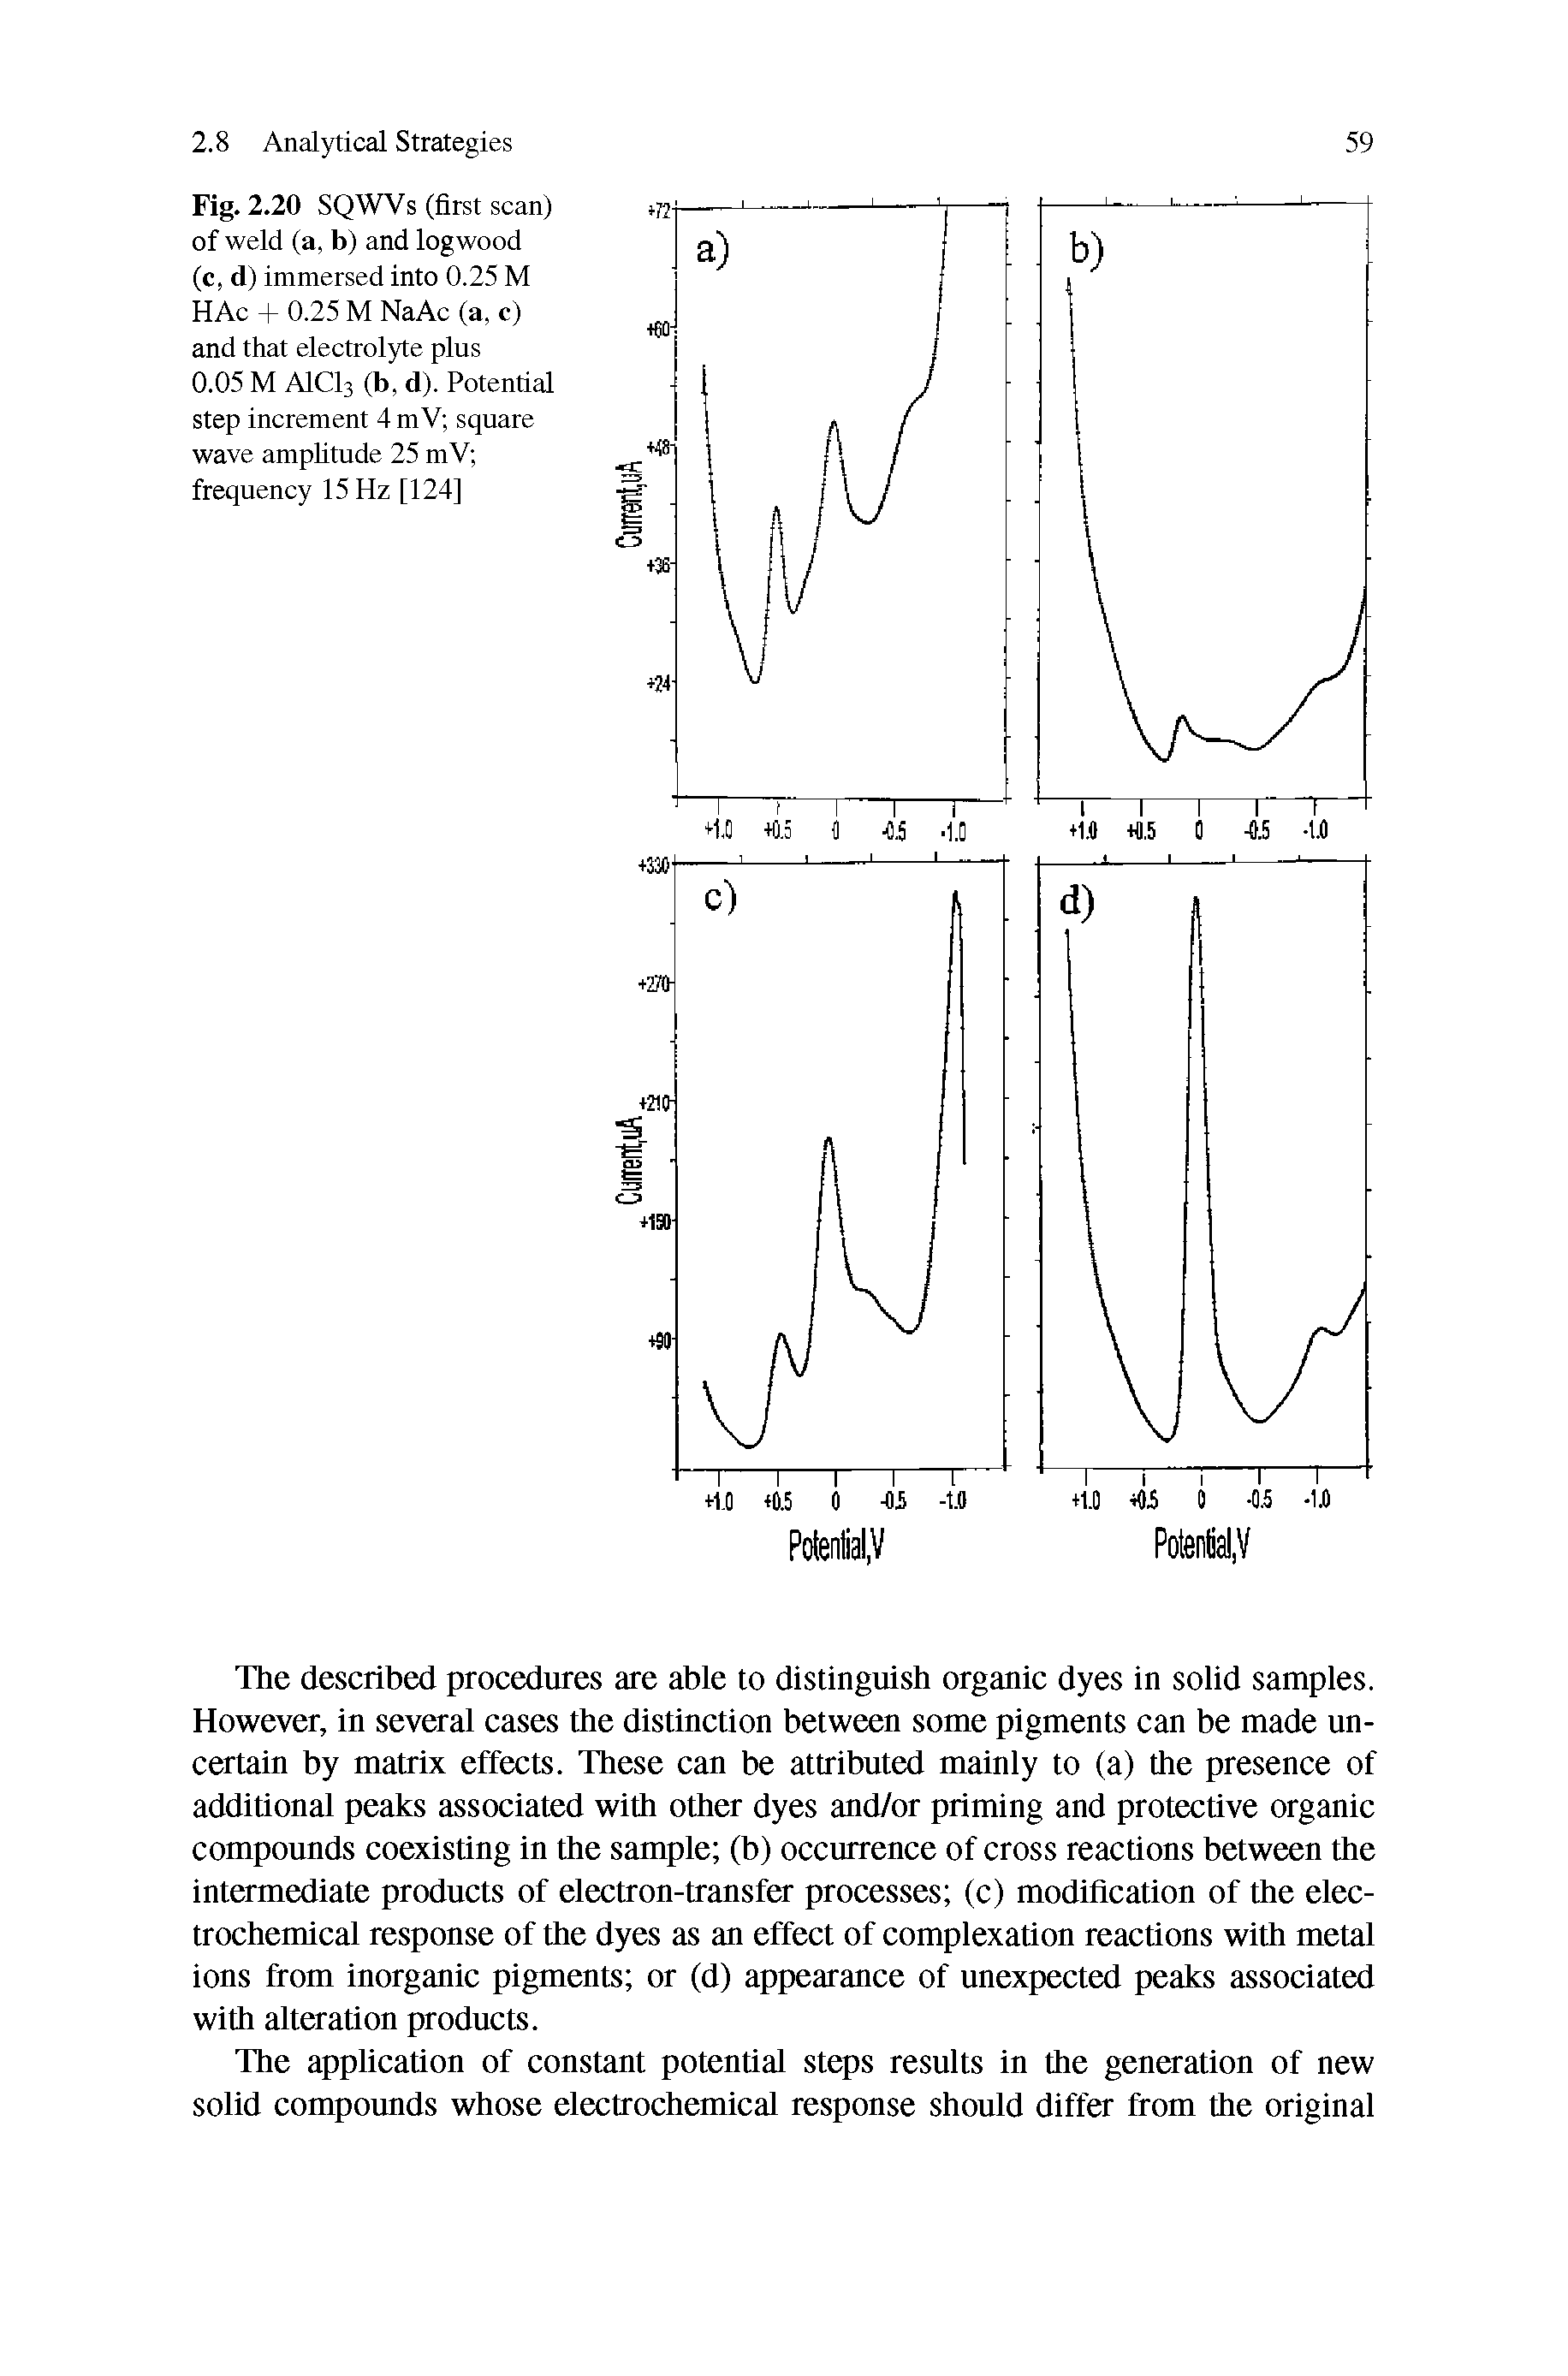 Fig. 2.20 SQWVs (first scan) of weld (a, b) and logwood (c, d) immersed into 0.25 M HAc + 0.25 M NaAc (a, c) and that electrolyte plus 0.05 M AICI3 (b, d). Potential step increment 4 mV square wave amplitude 25 mV frequency 15 Hz [124]...